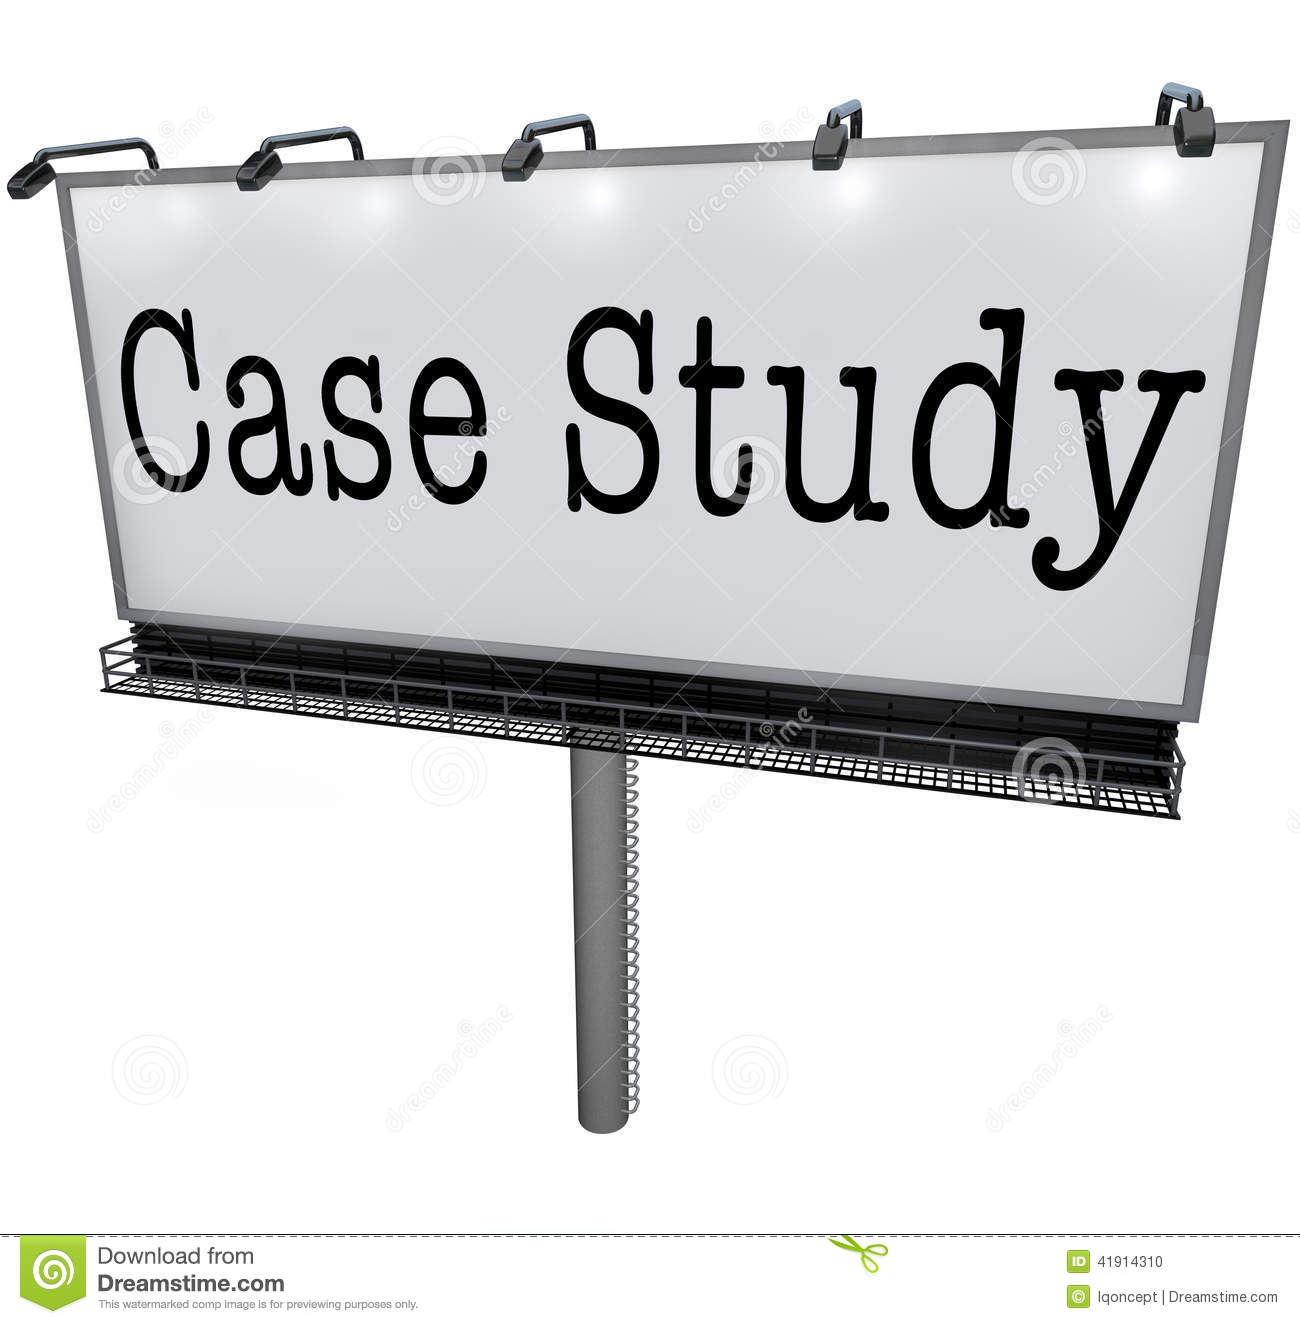 Case Study Words On A White Billboard Banner Or Sign To Illustrate A